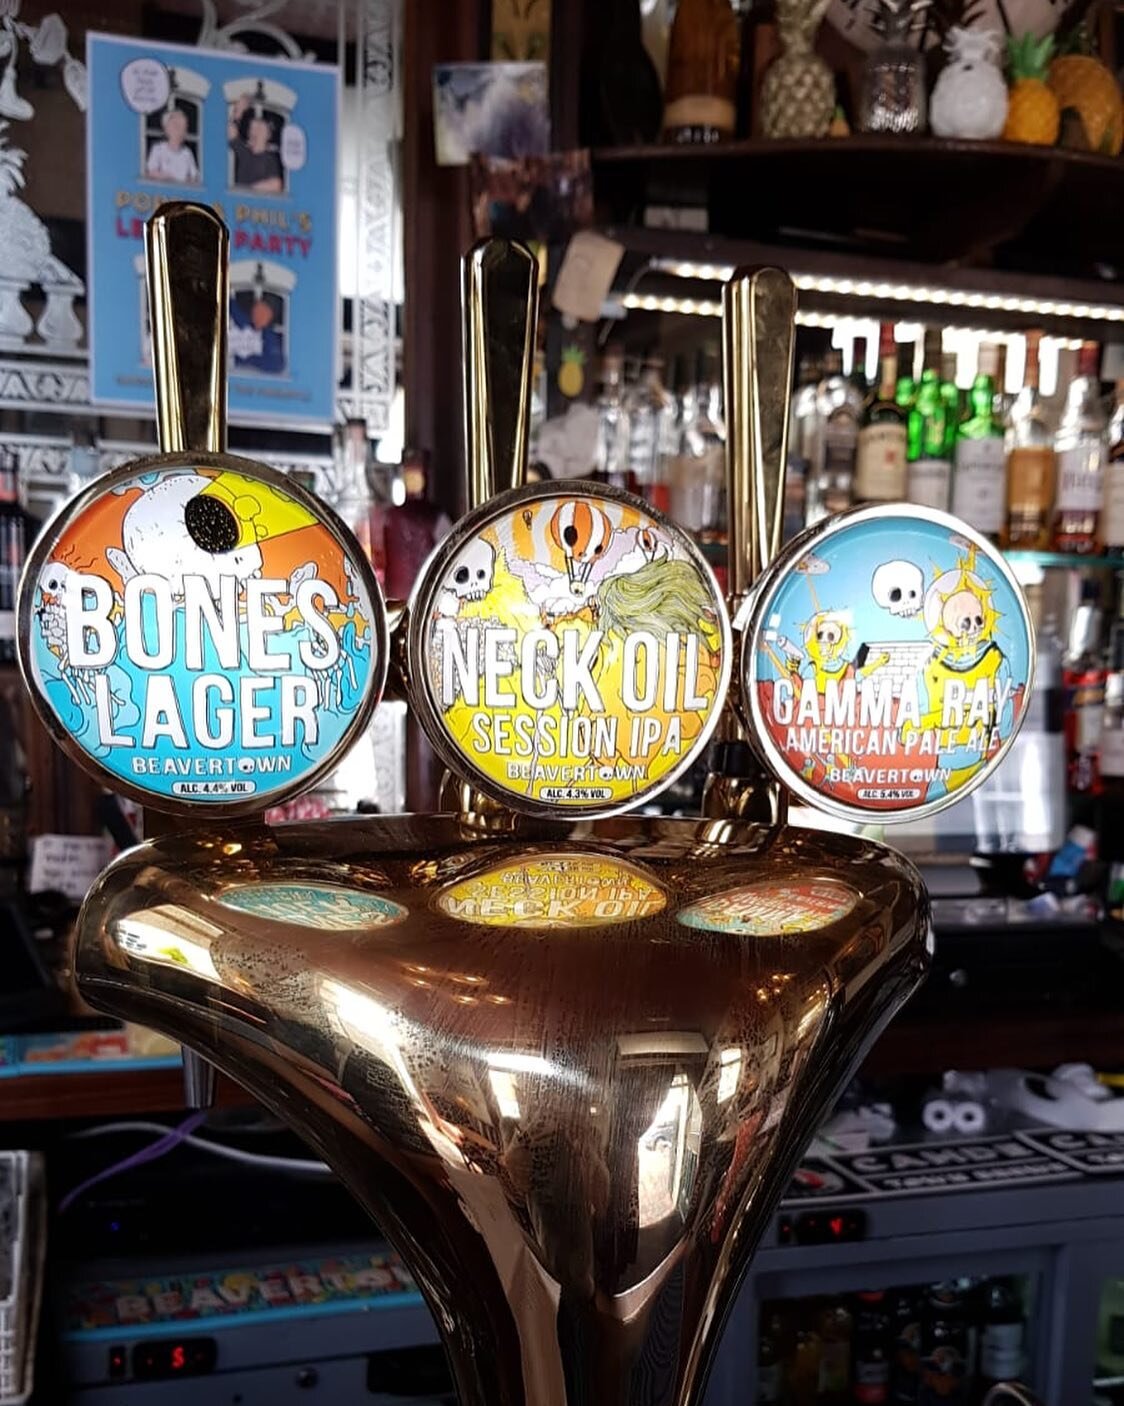 🍻NEW BEER ALERT🍻

We&rsquo;ve now got the Beavertown Trifecta fresh from the tap, so come on down and try them all!

#beavertown #beavertownbrewery #boneslager #neckoil #gammaray #pub #beer #lager #ipa #kentish #kentishtown #kentishpub #publife #dr